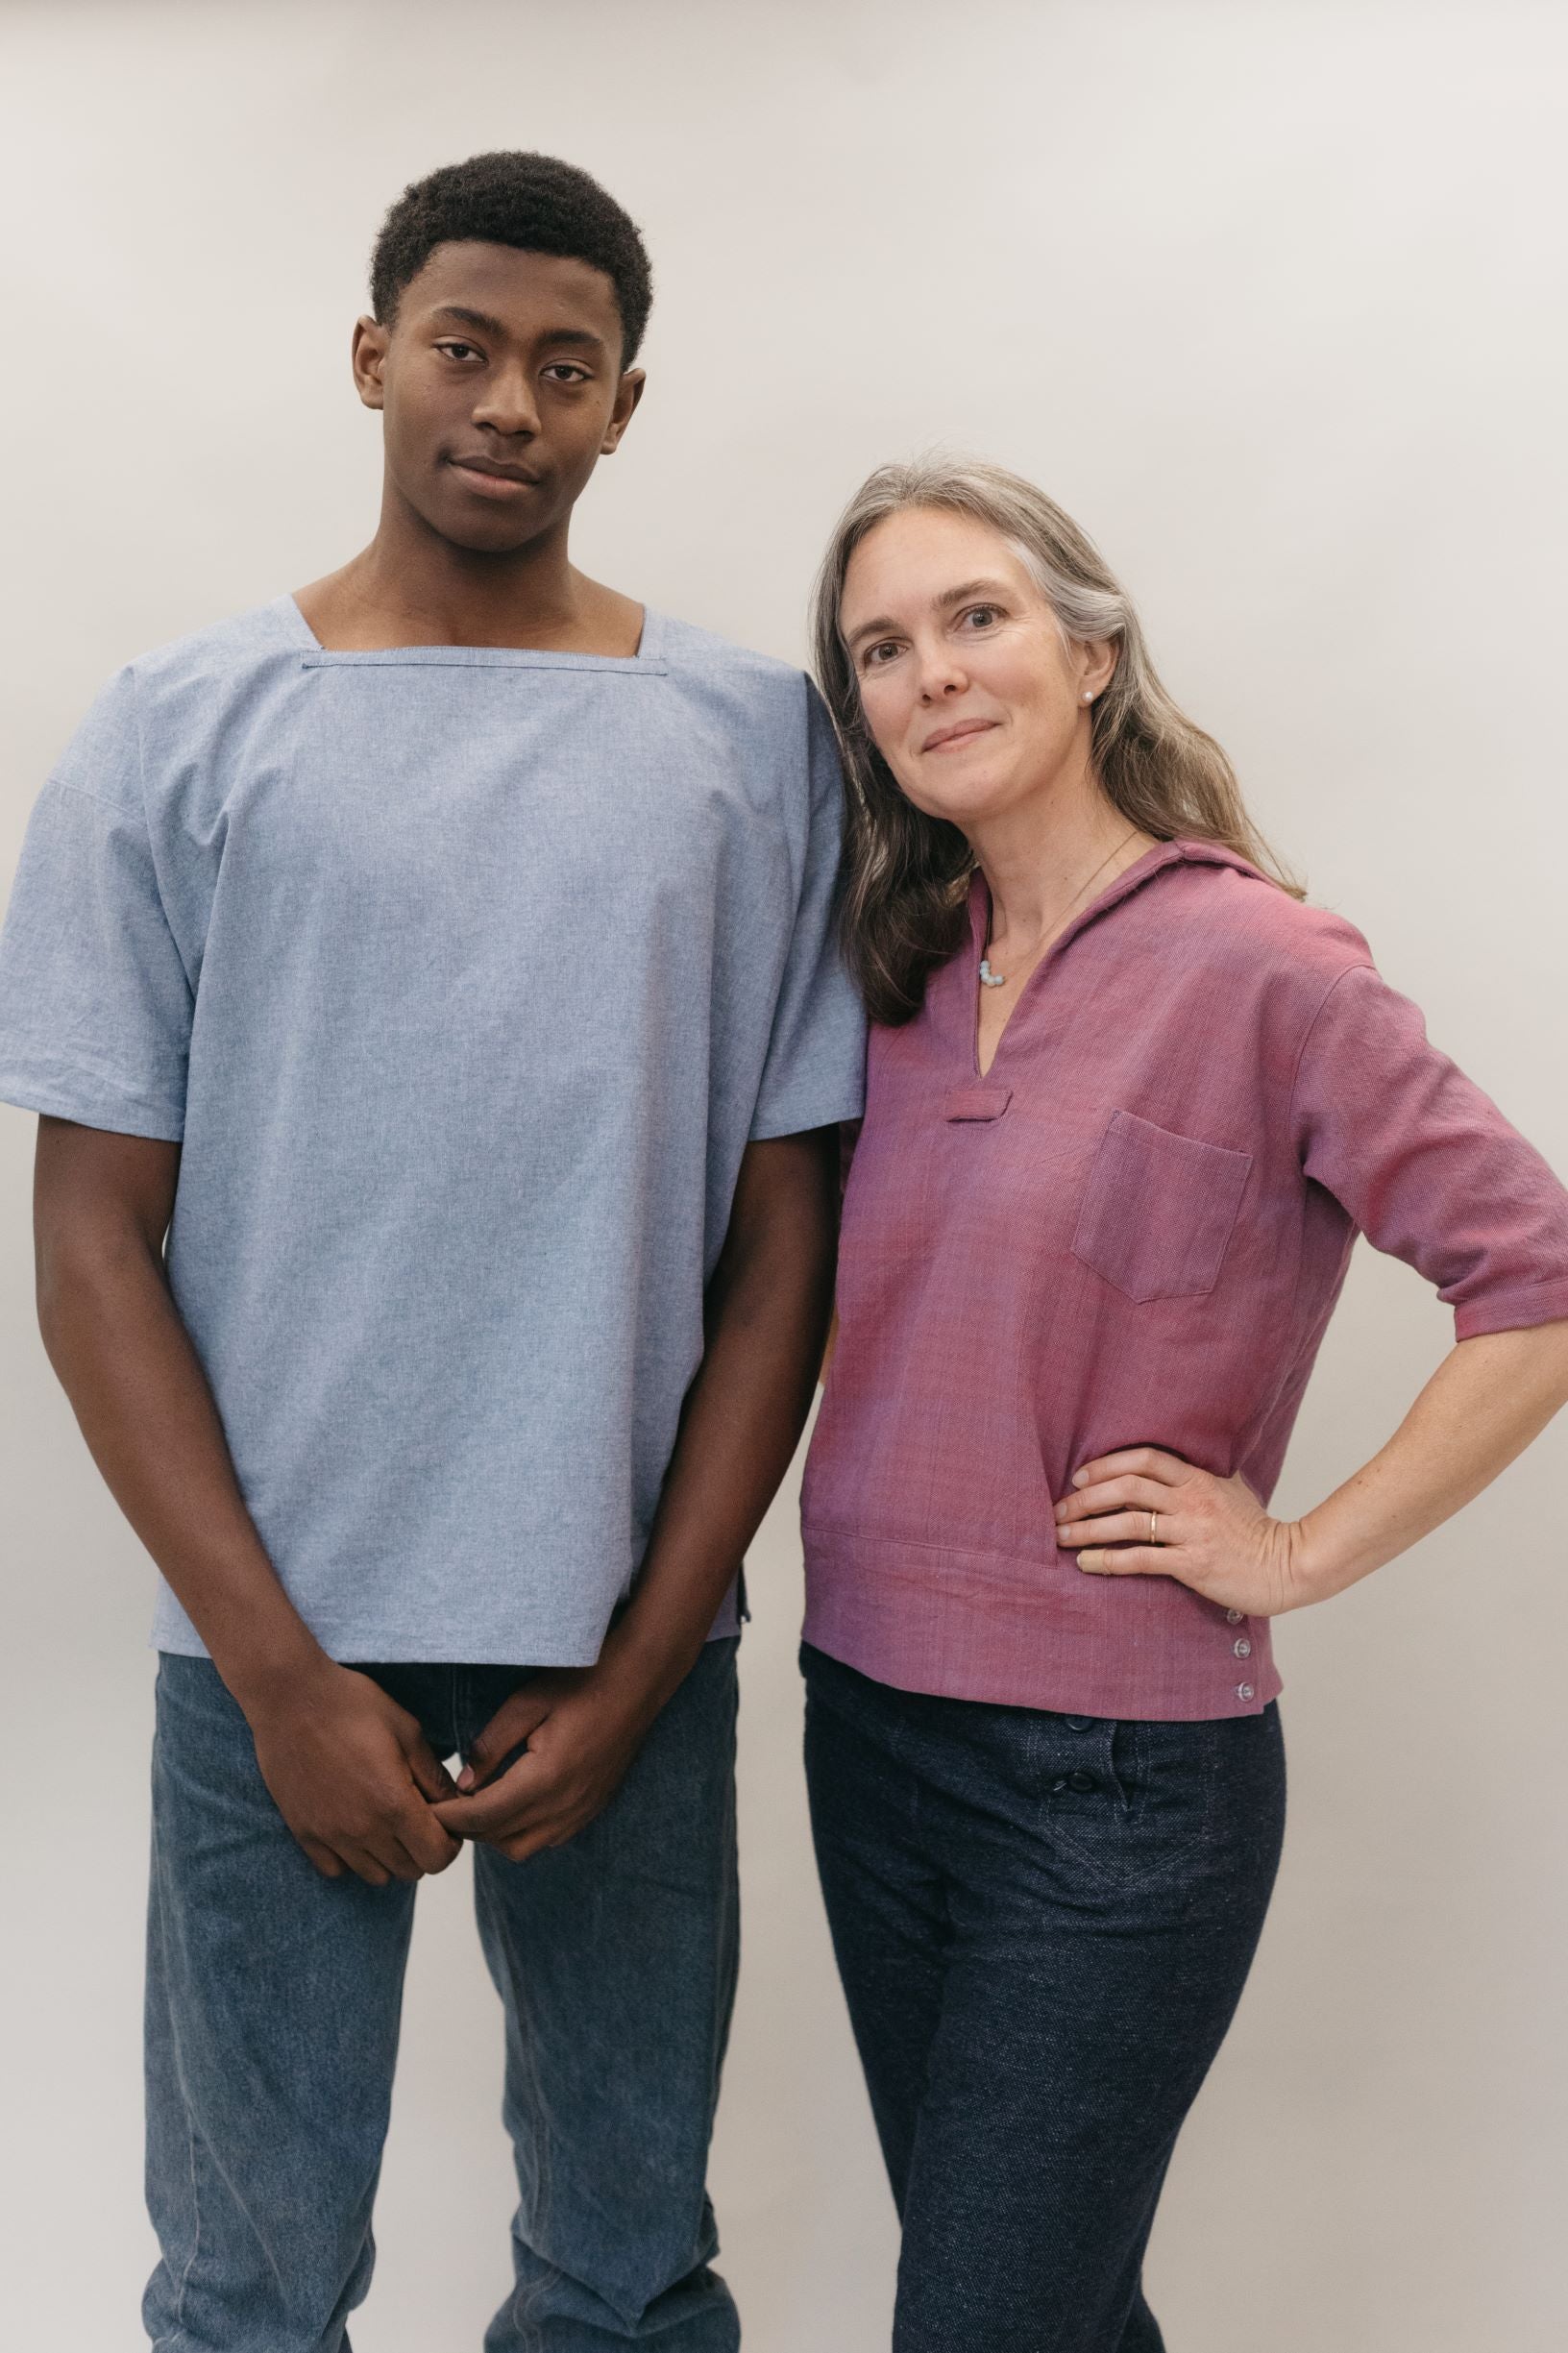 Man and woman wearing middy shirts (one blue and one pink) standing in front of a white background